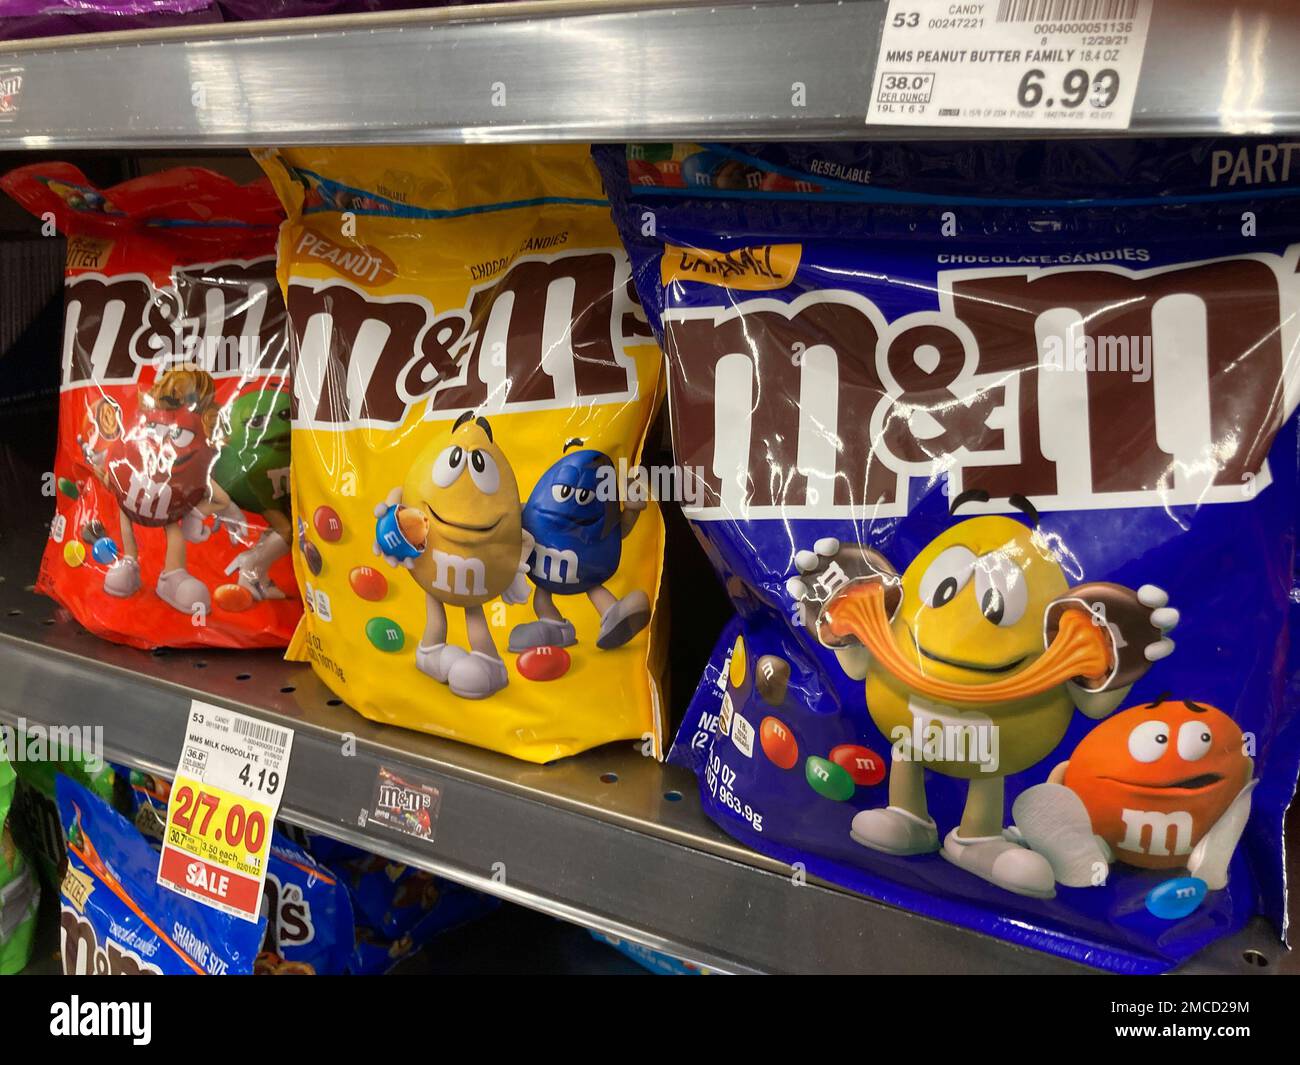 M&M's characters get a makeover to promote inclusivity